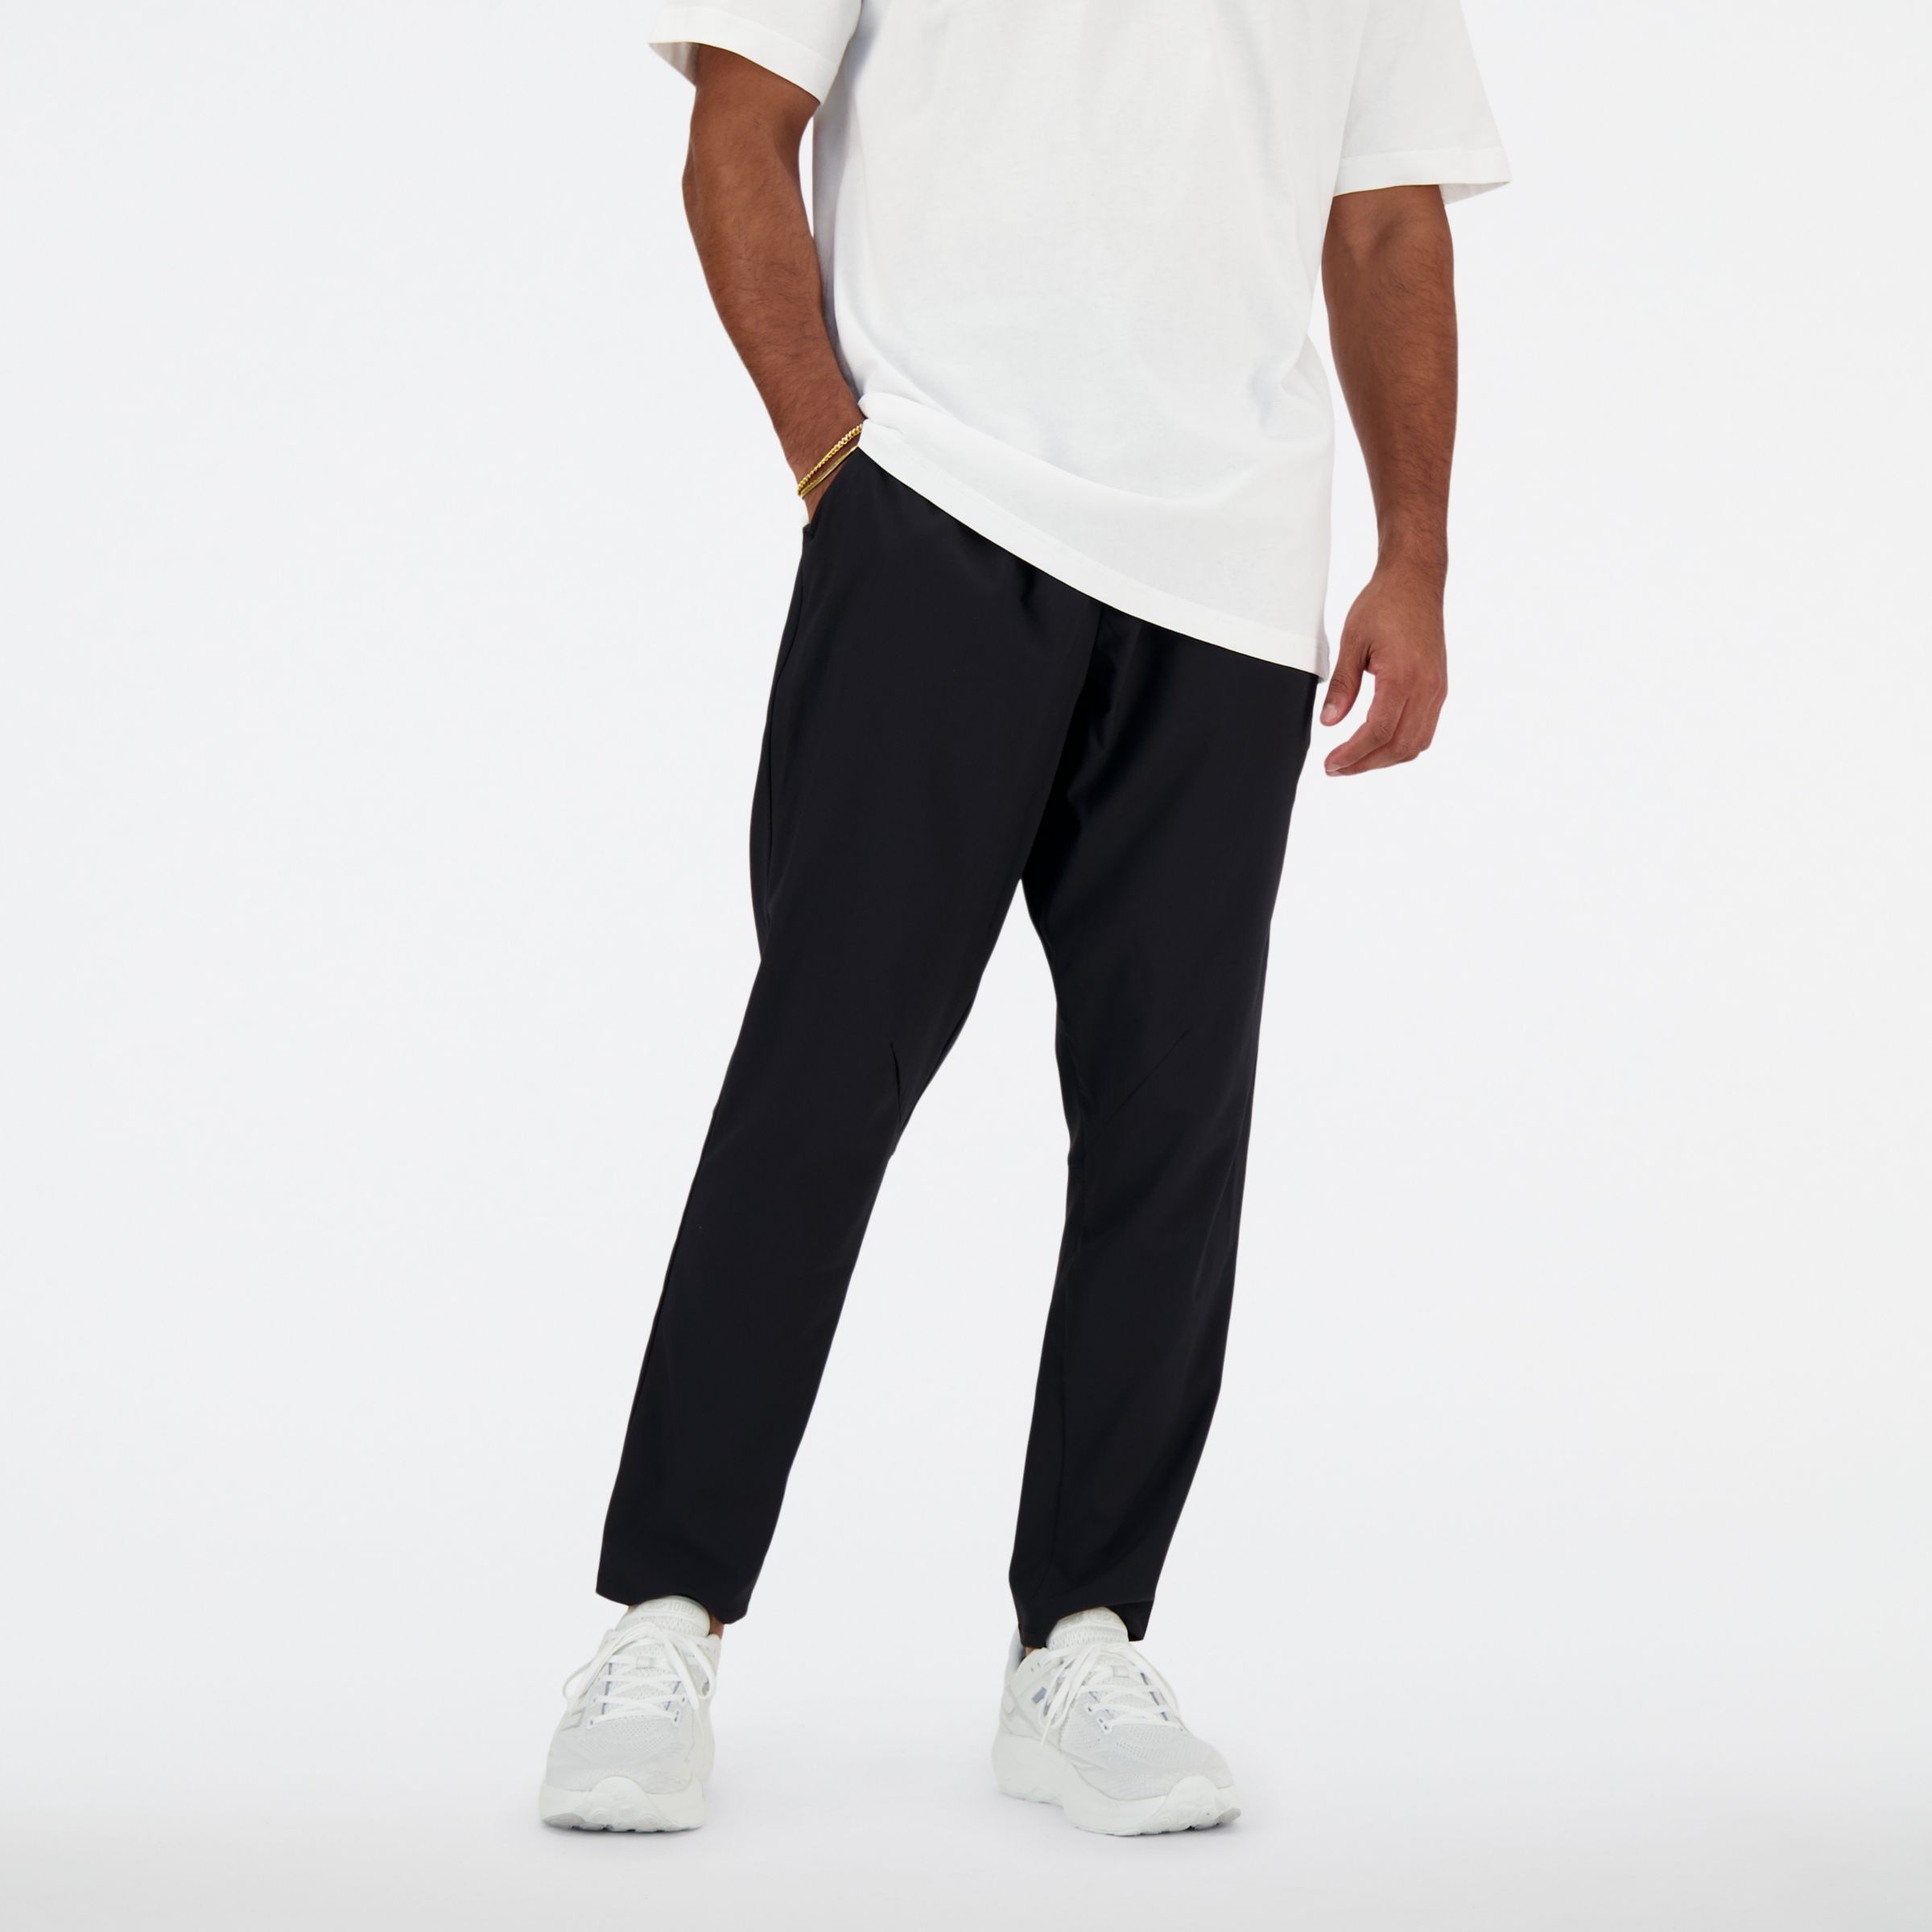 AC Tapered Pant 27" - 1